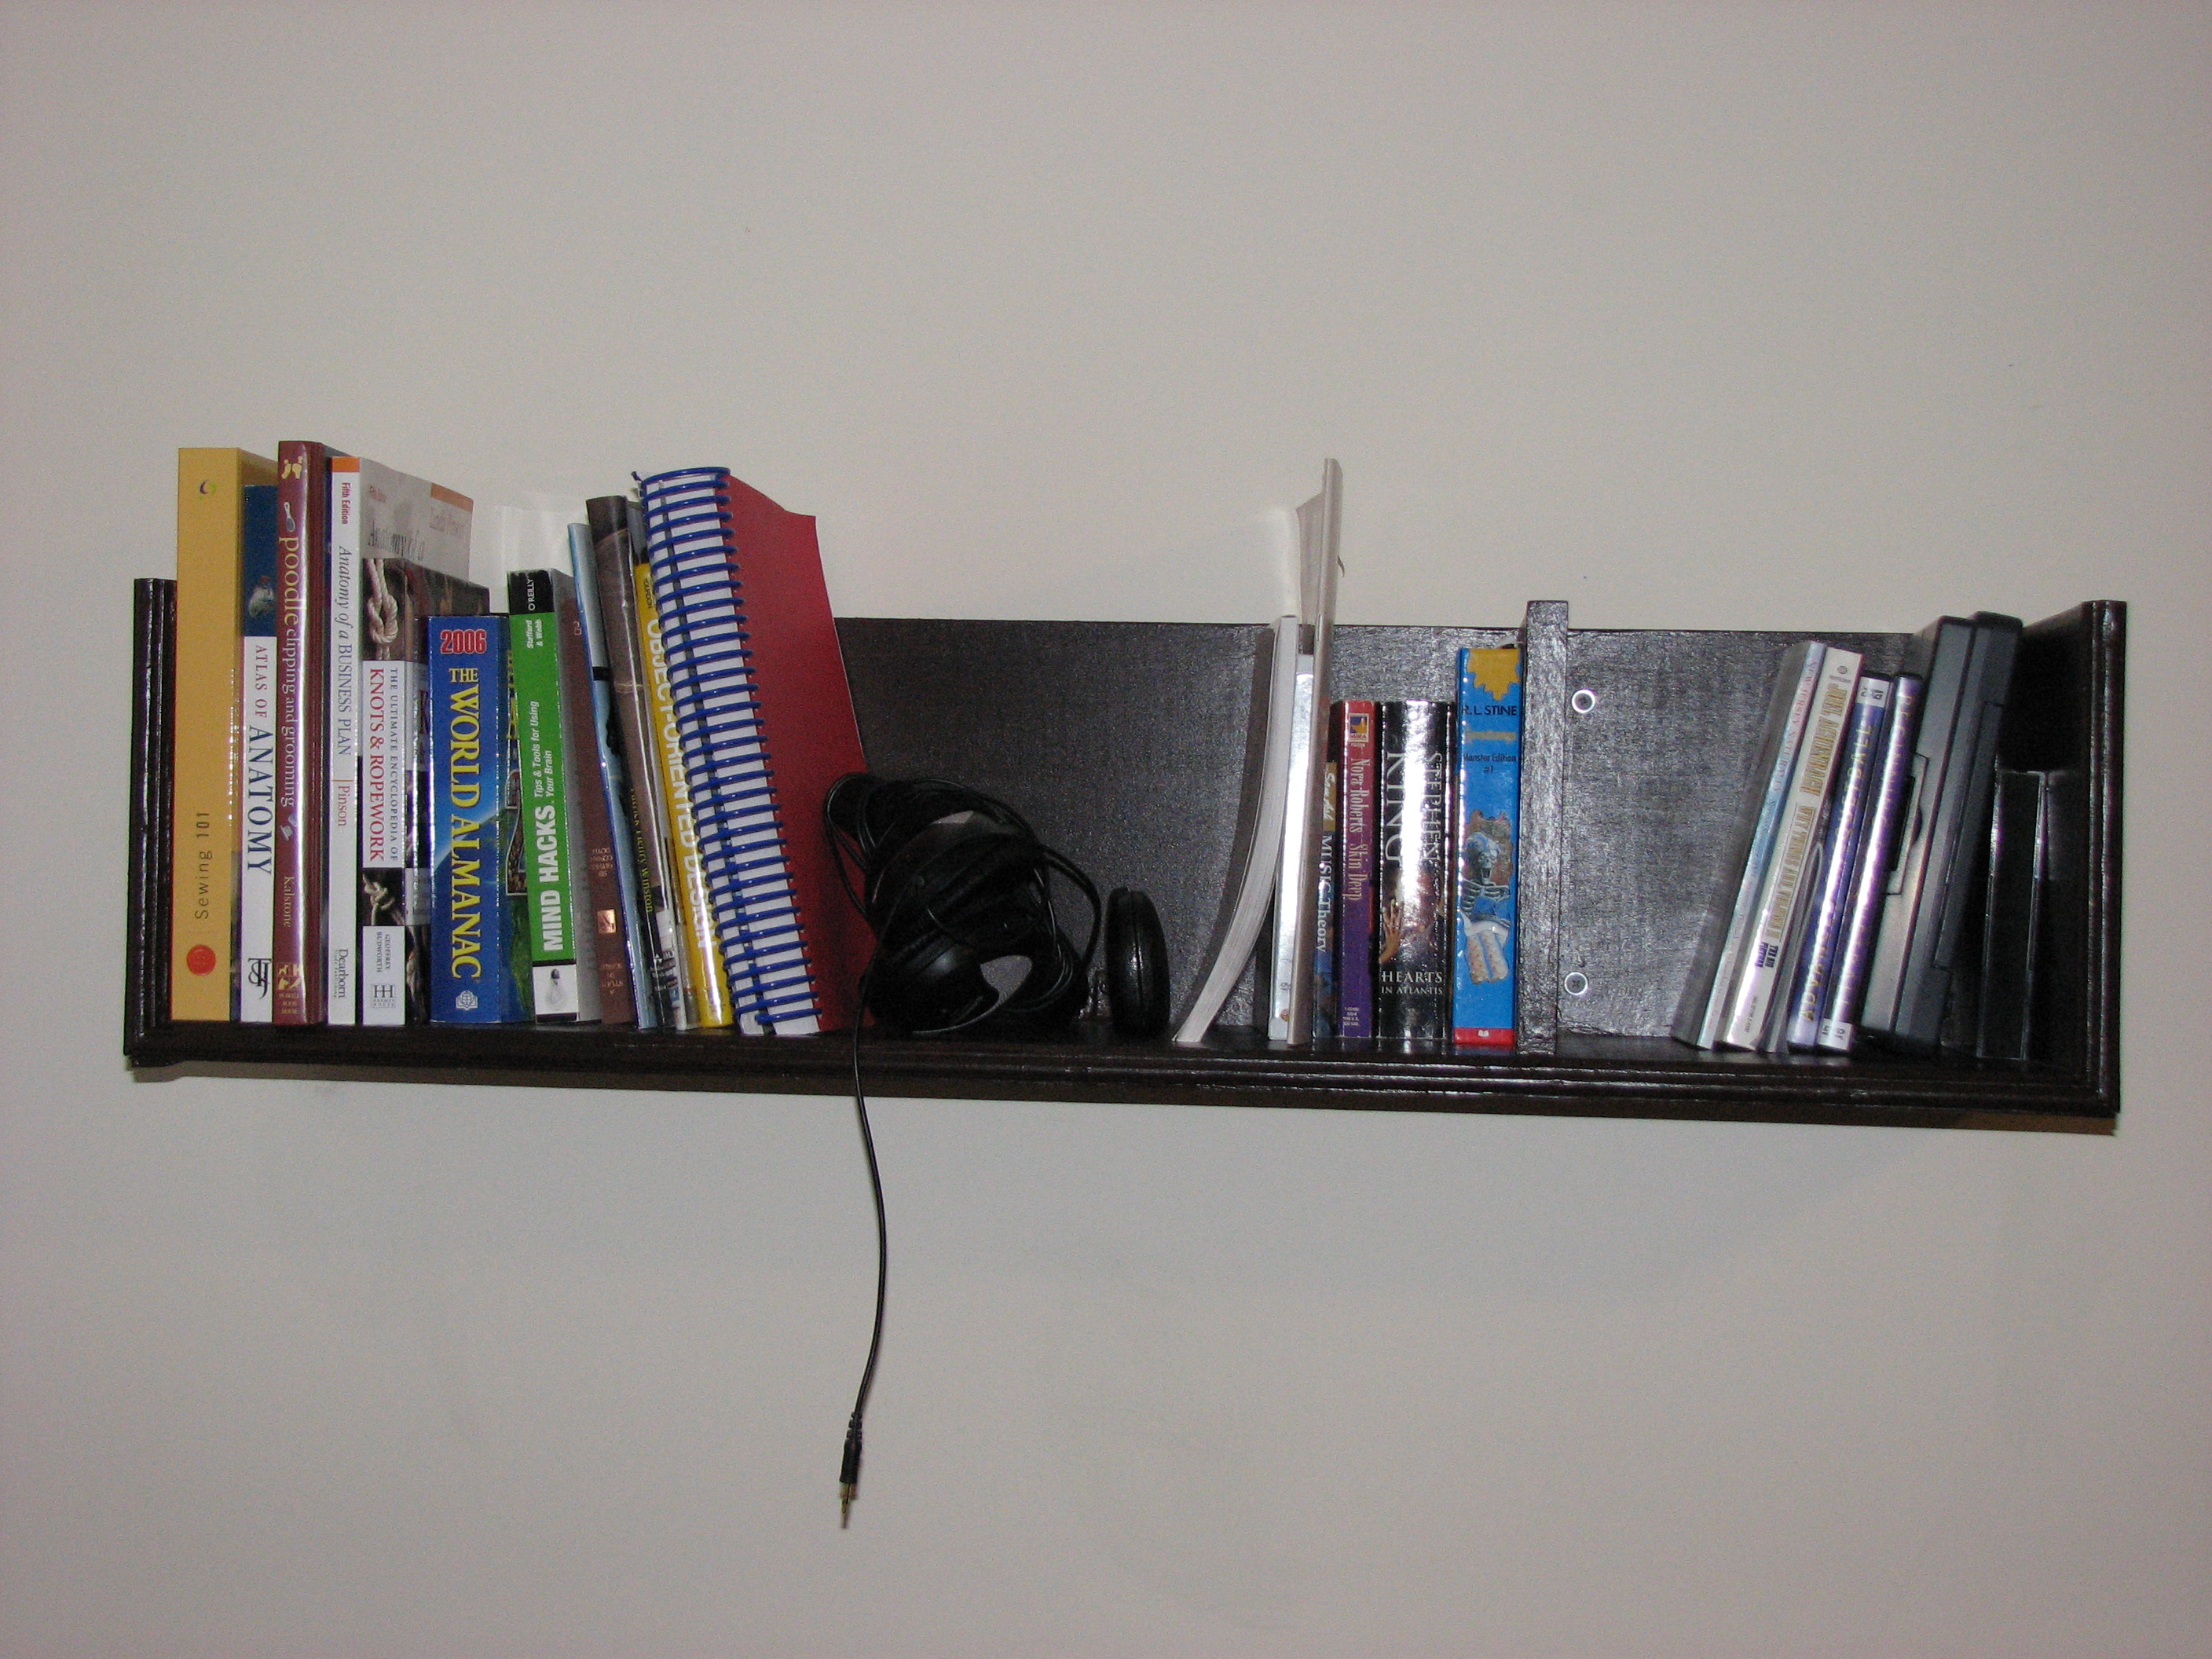 How to build wall mounted bookshelves for less than $100